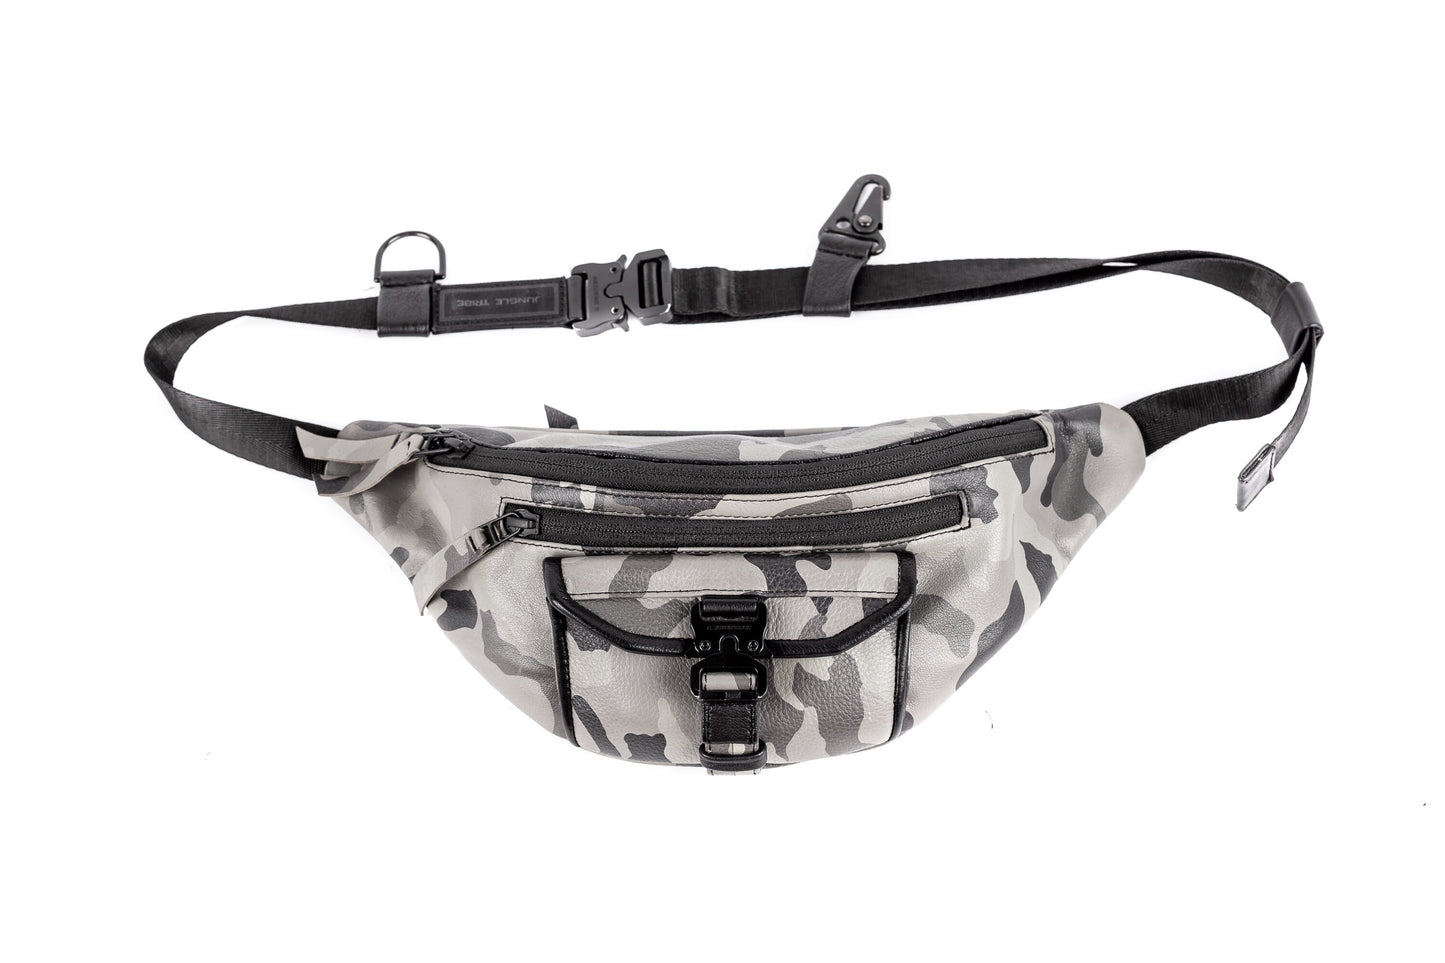 Downtown Gray Camo Leather Fanny Pack Sling Bag Utility Passport Holder